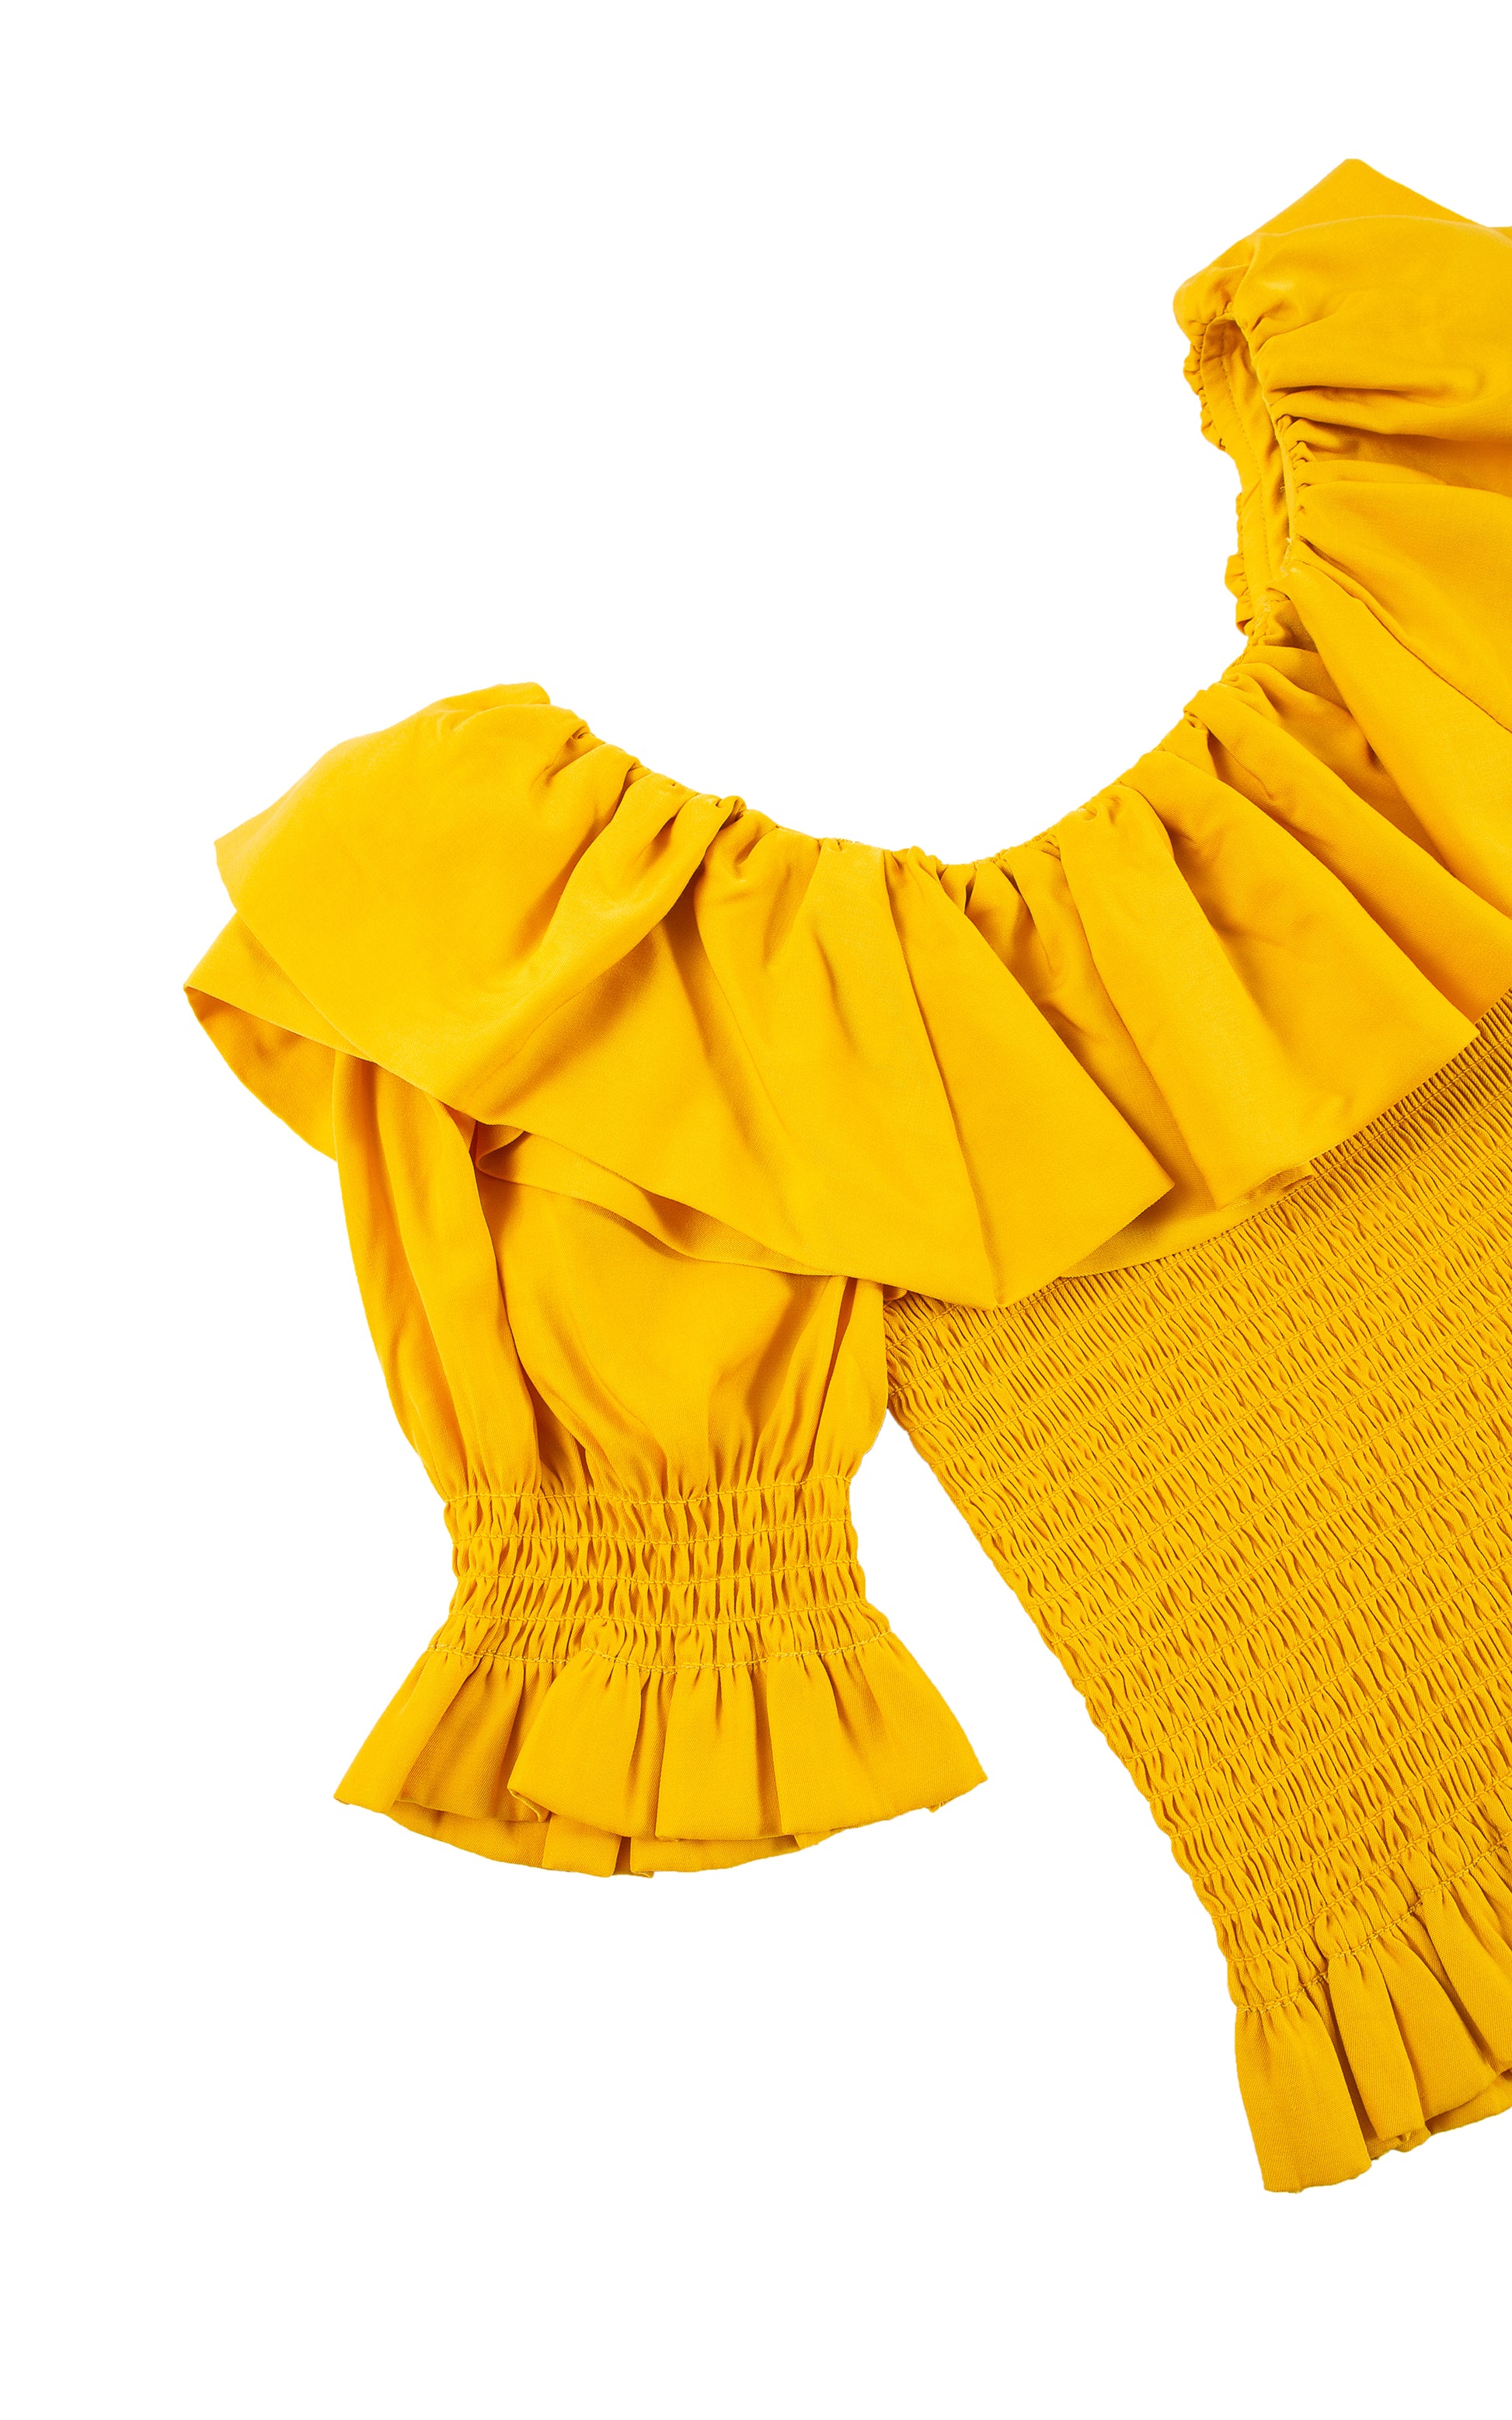 CLOSE UP OF YELLOW THREE-QUARTER-LENGTH SLEEVE TOP WITH A WIDE RUFFLED NECKLINE AND A SMOCKED BODICE